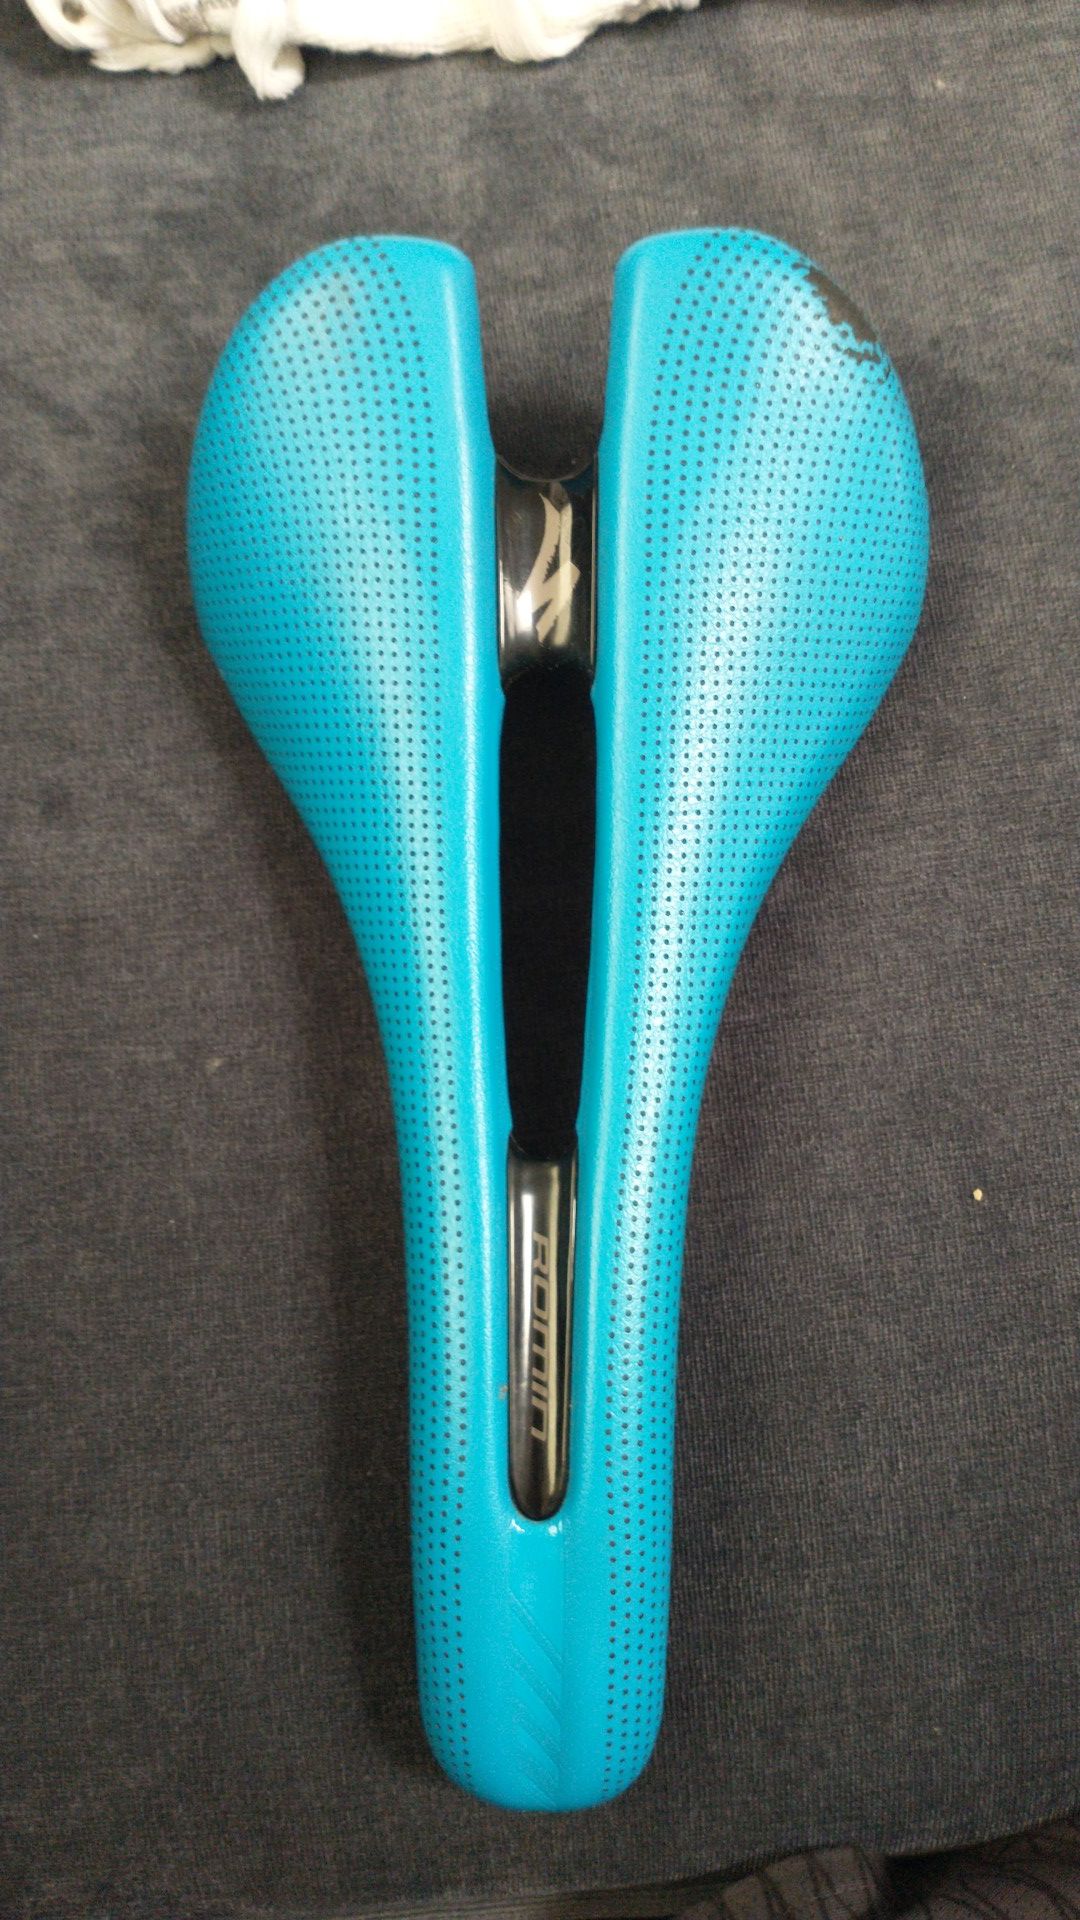 Specialized Romin saddle, 143mm